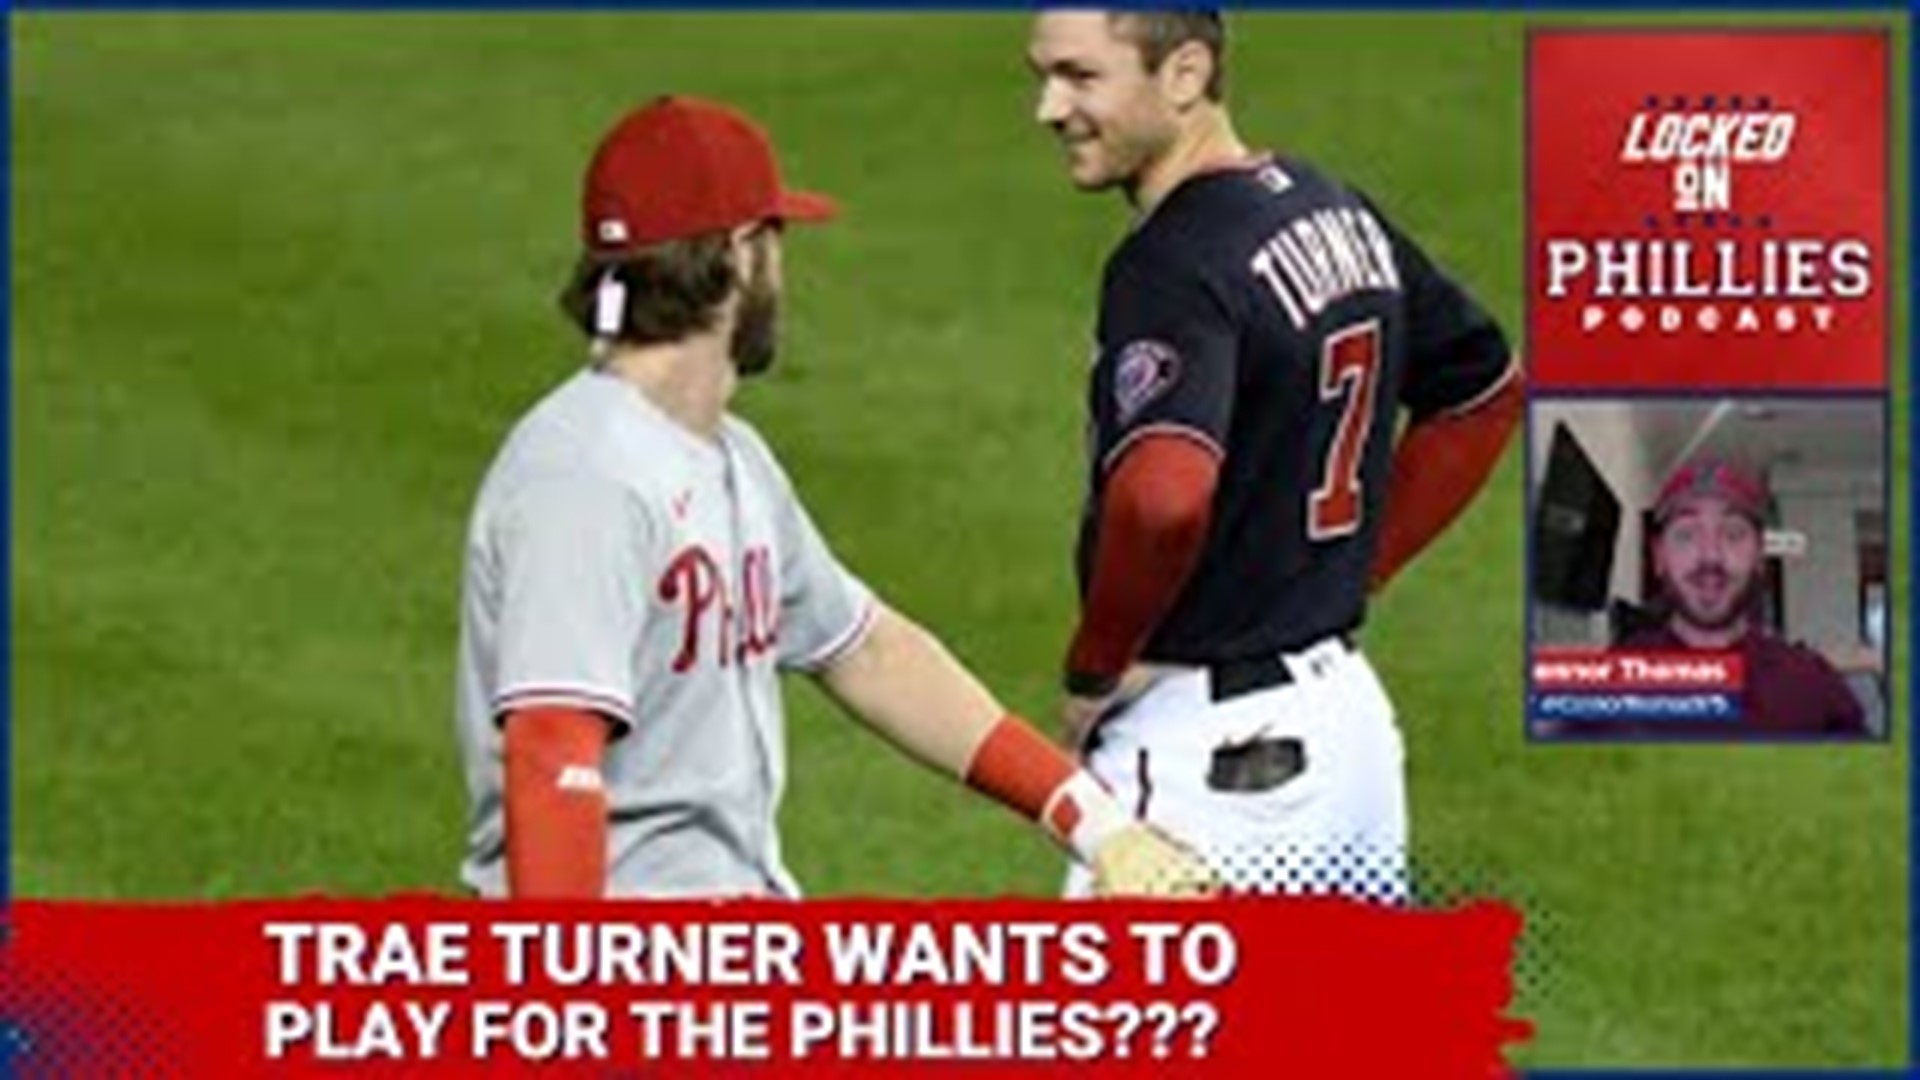 Connor discusses Hall of Fame writer Jayson Stark's recent comments on 97.5 The Fanatic that he has been hearing rumblings that Trea Turner wants to play for Philly.